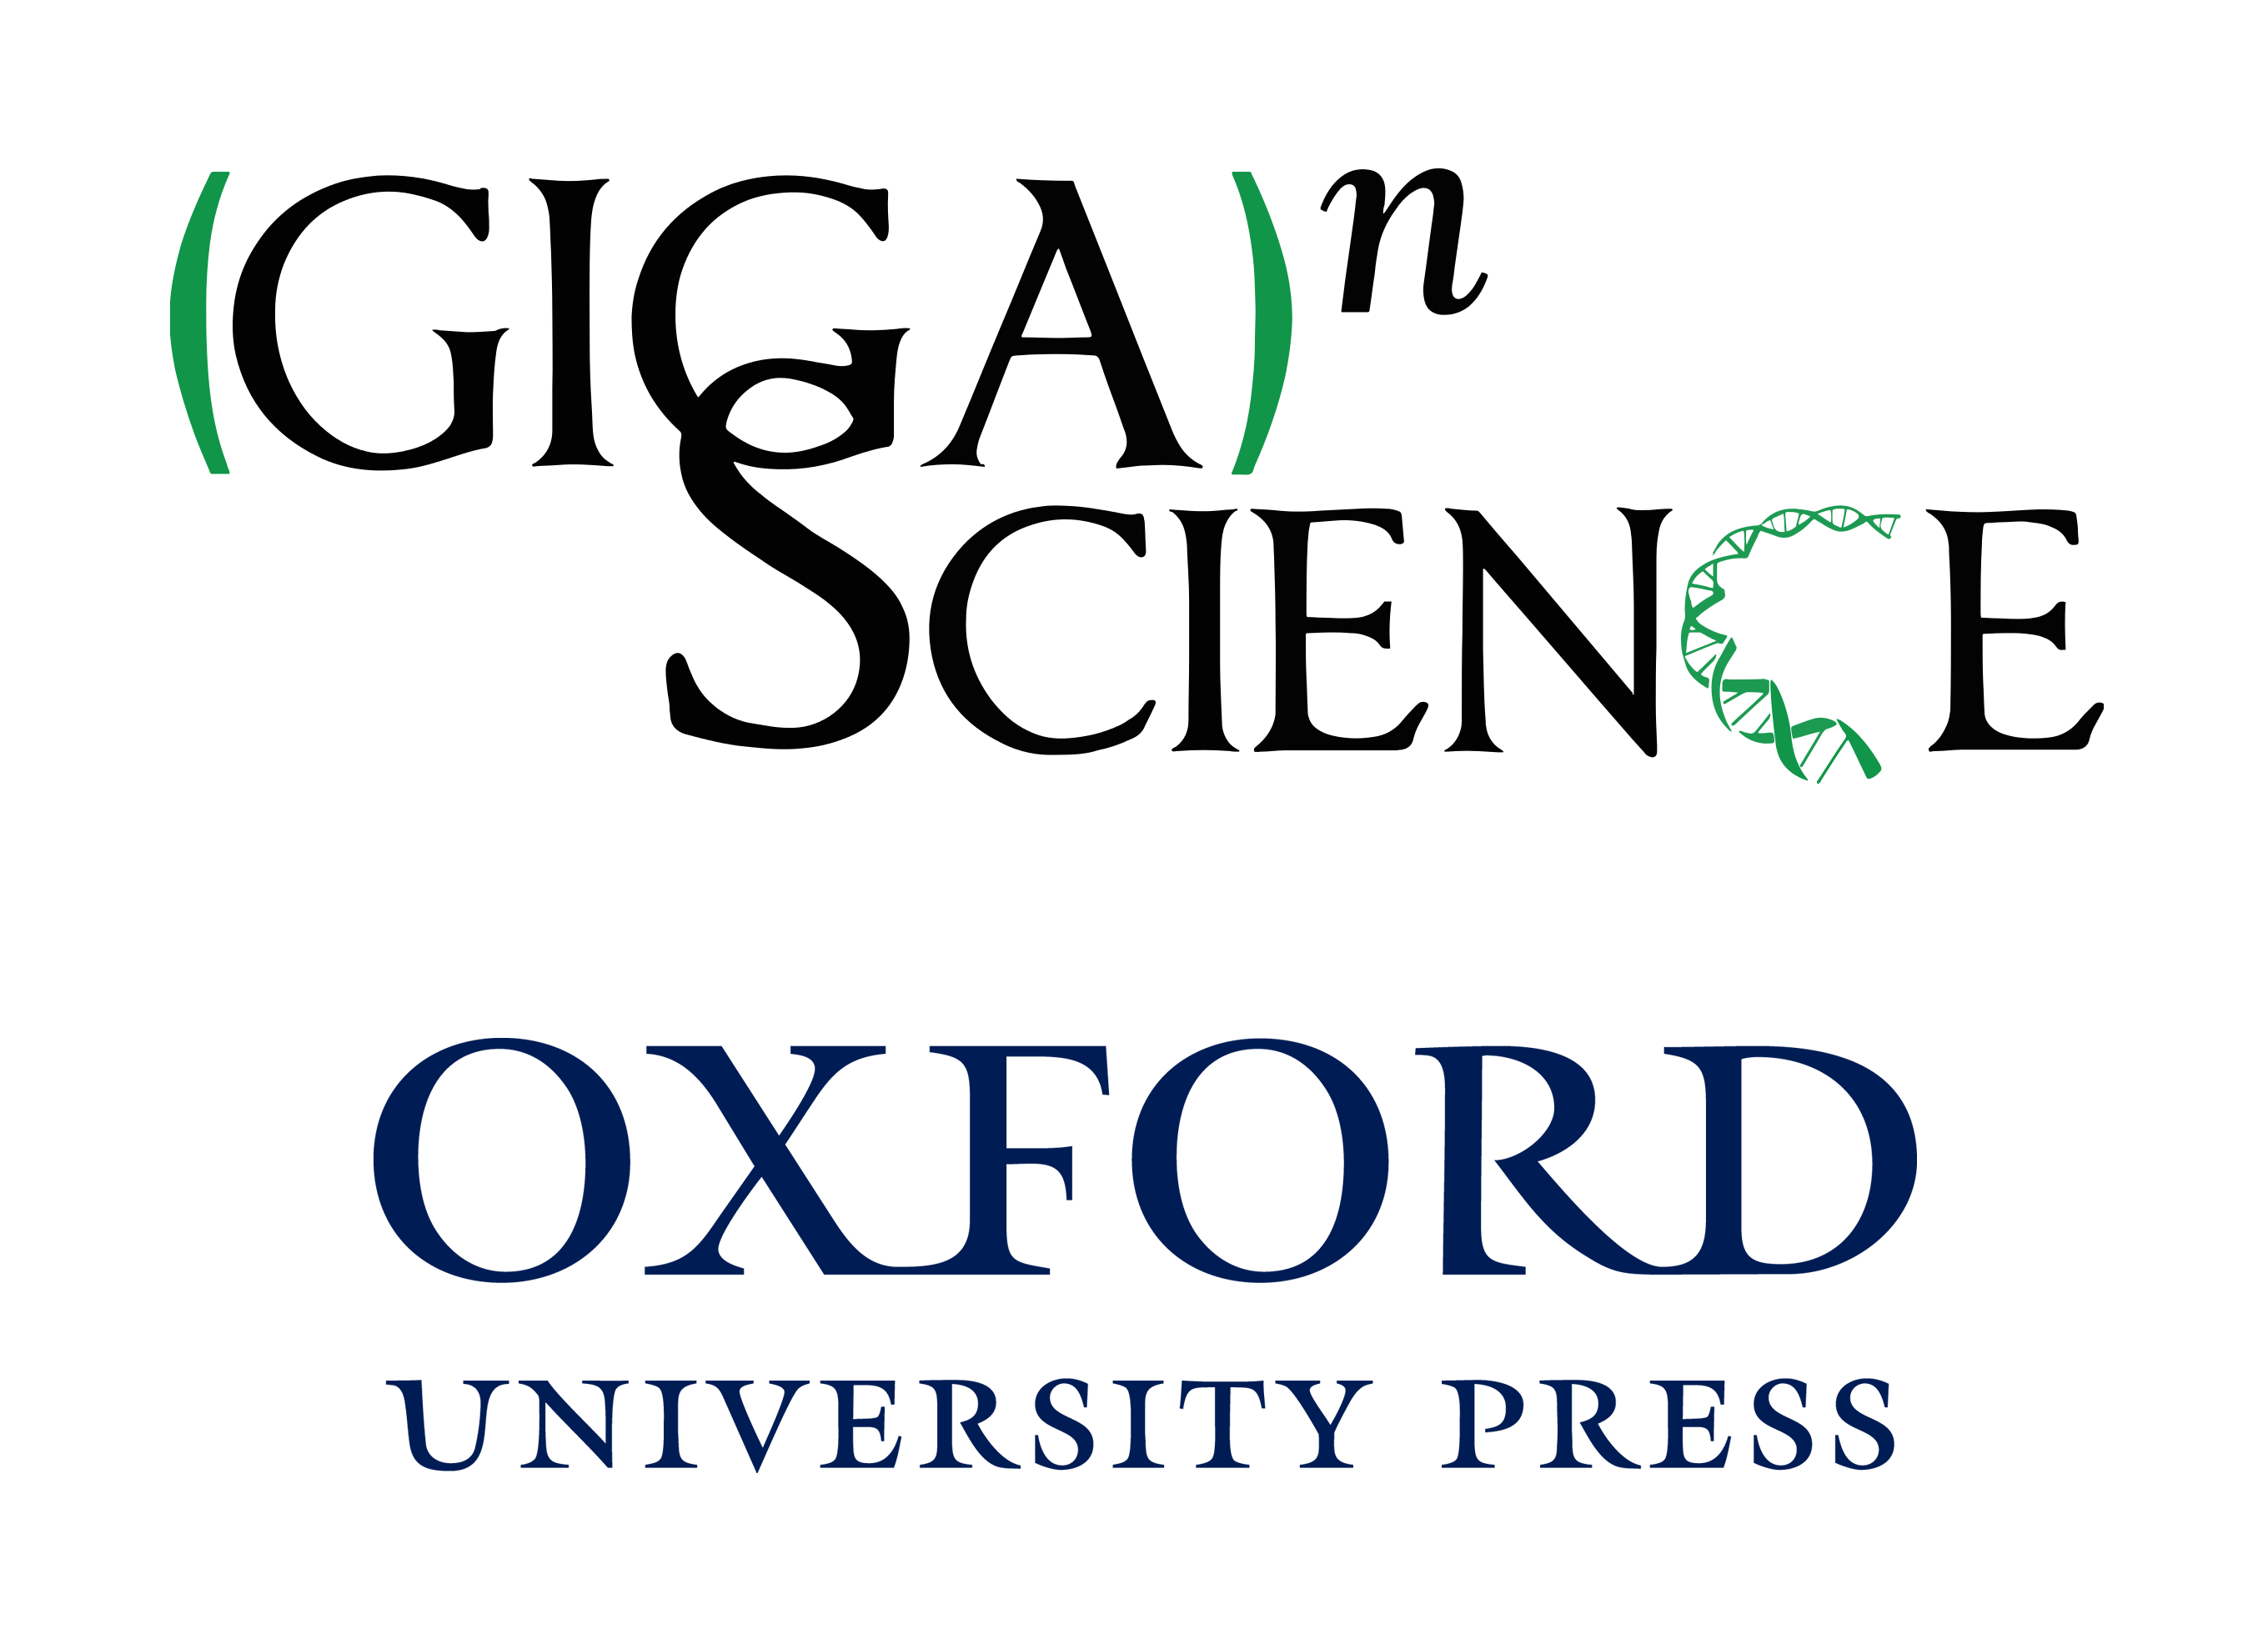 GigaScience, focusing on ‘big data’ research from the life and biomedical sciences.